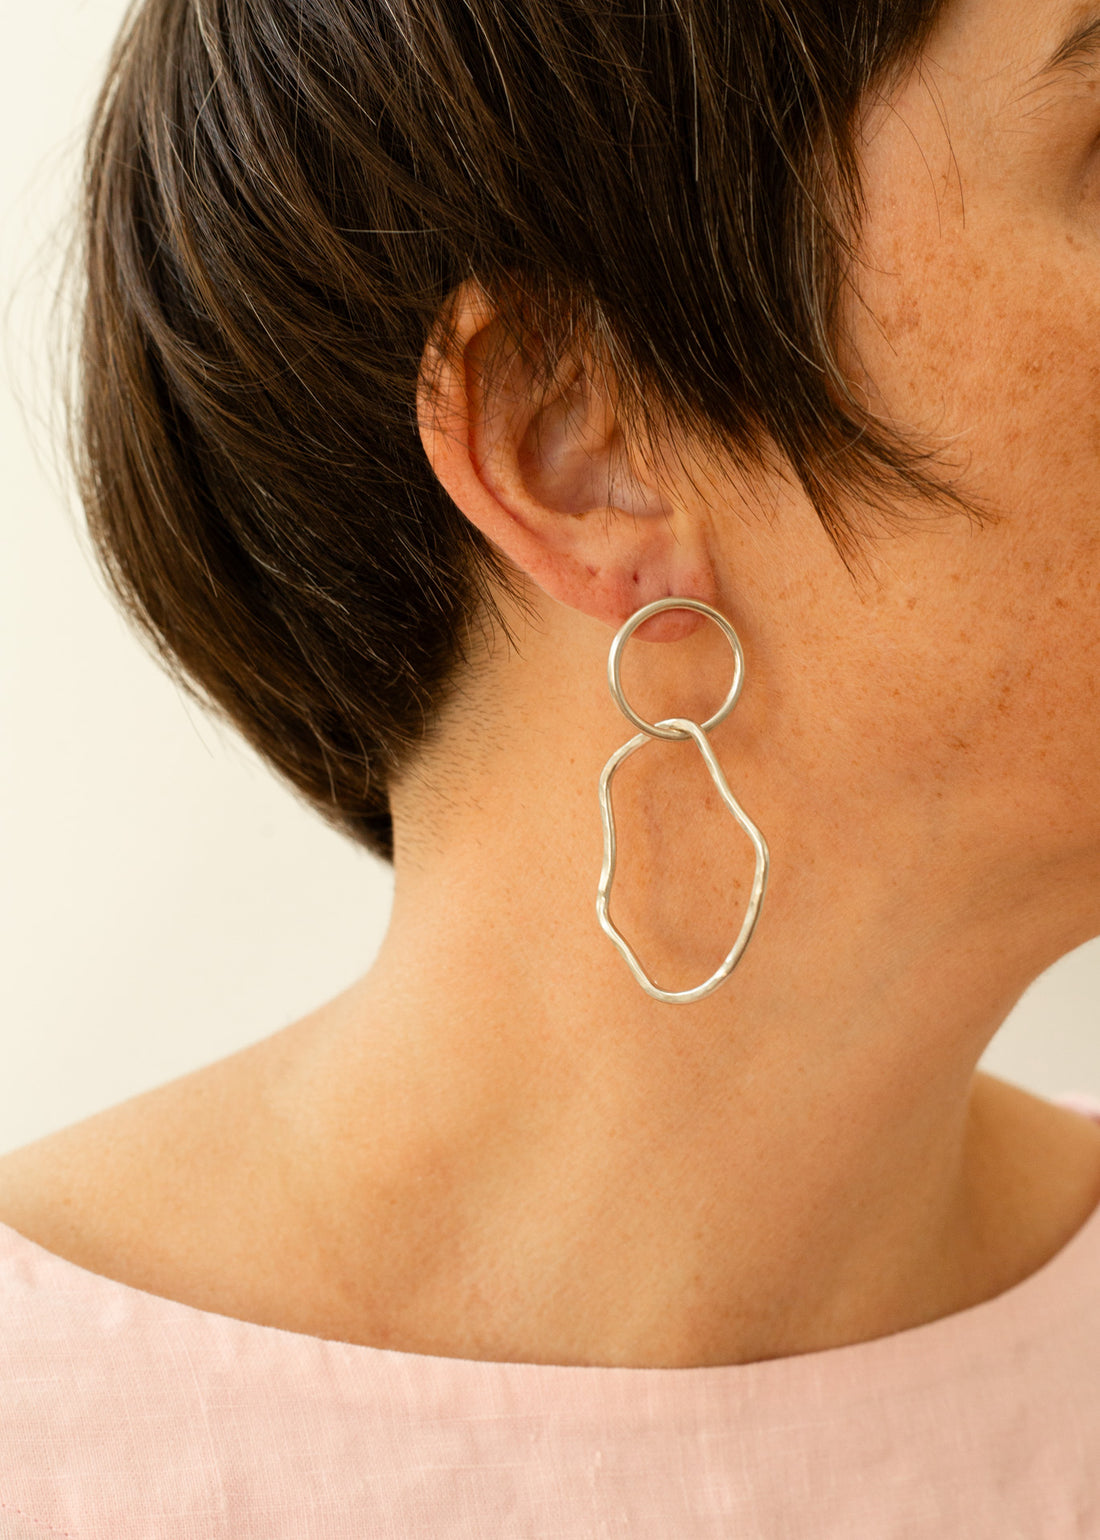 Sterling silver hoop with an organic shape hoop attached, hanging on a model